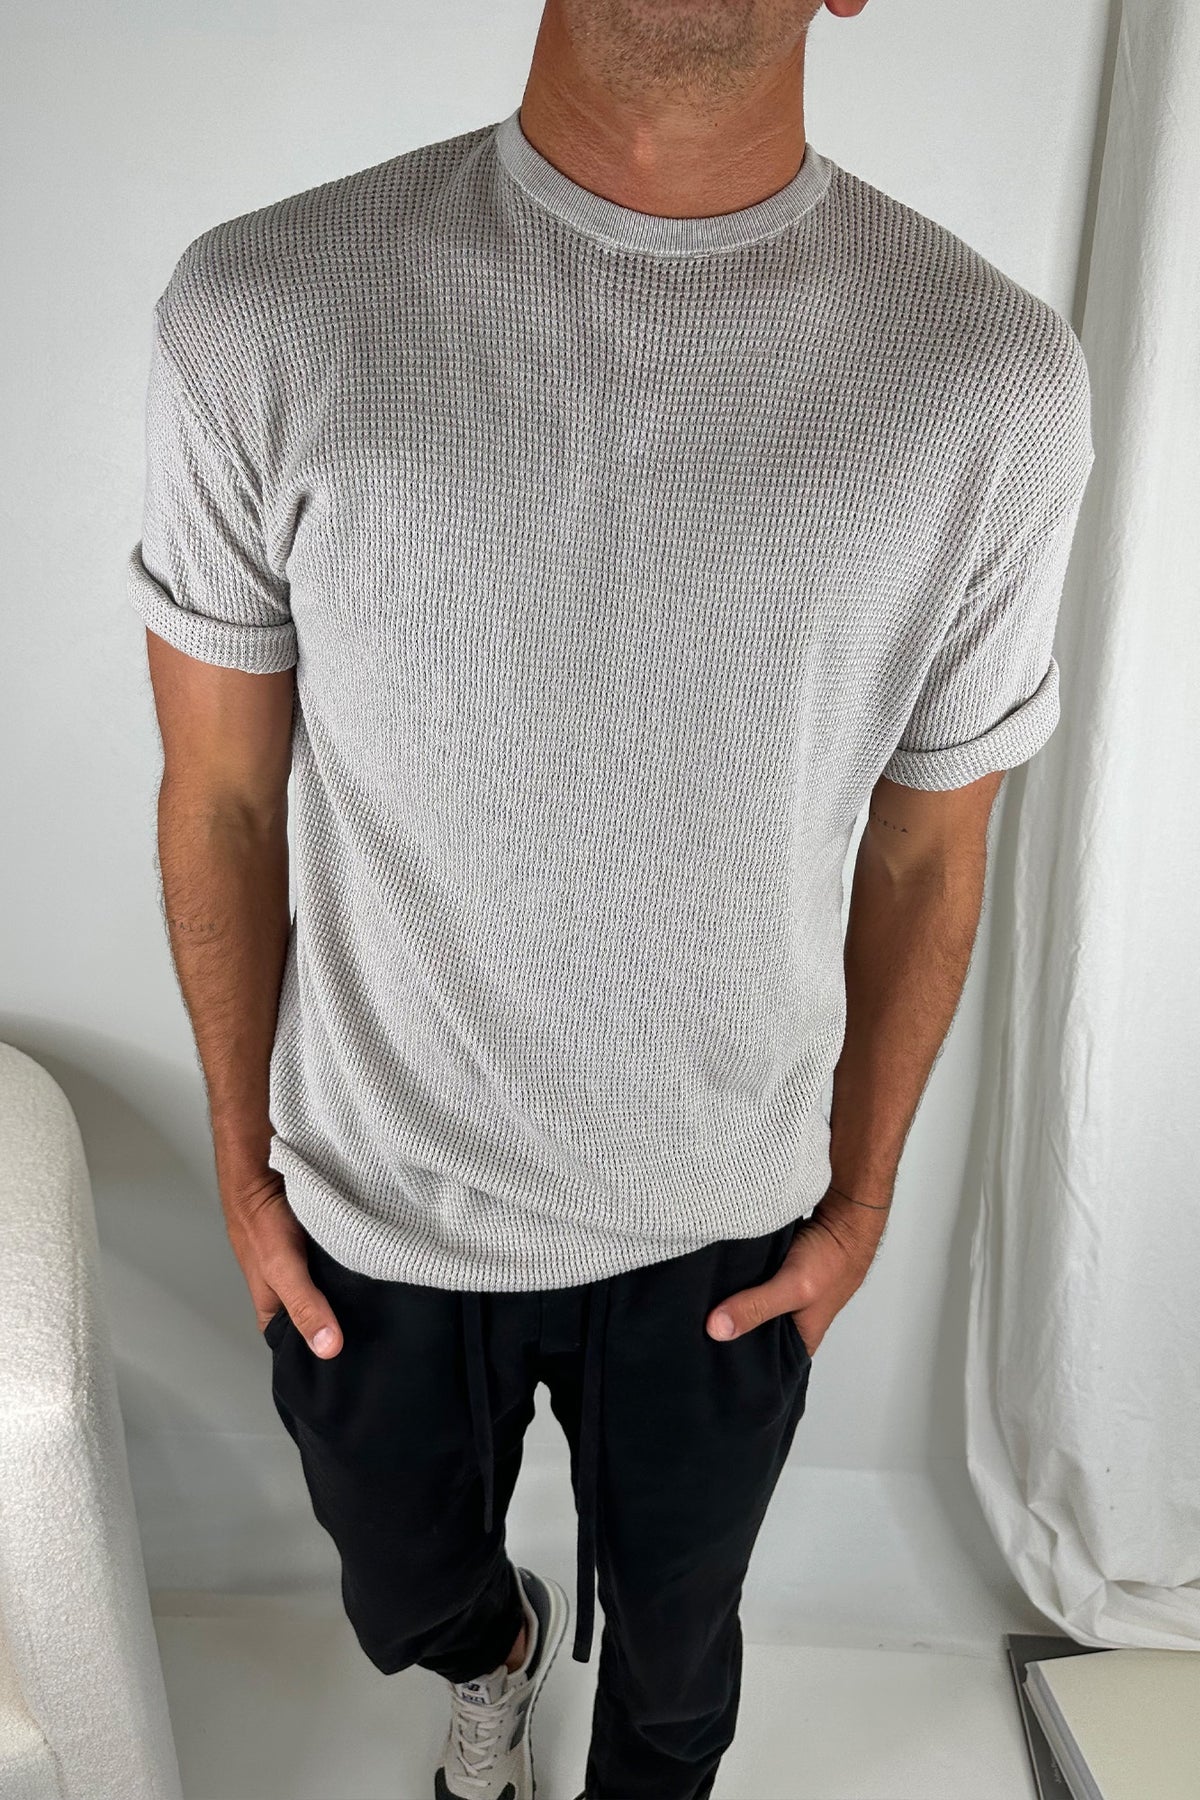 NTH Knitted Tee Grey - FINAL SALE